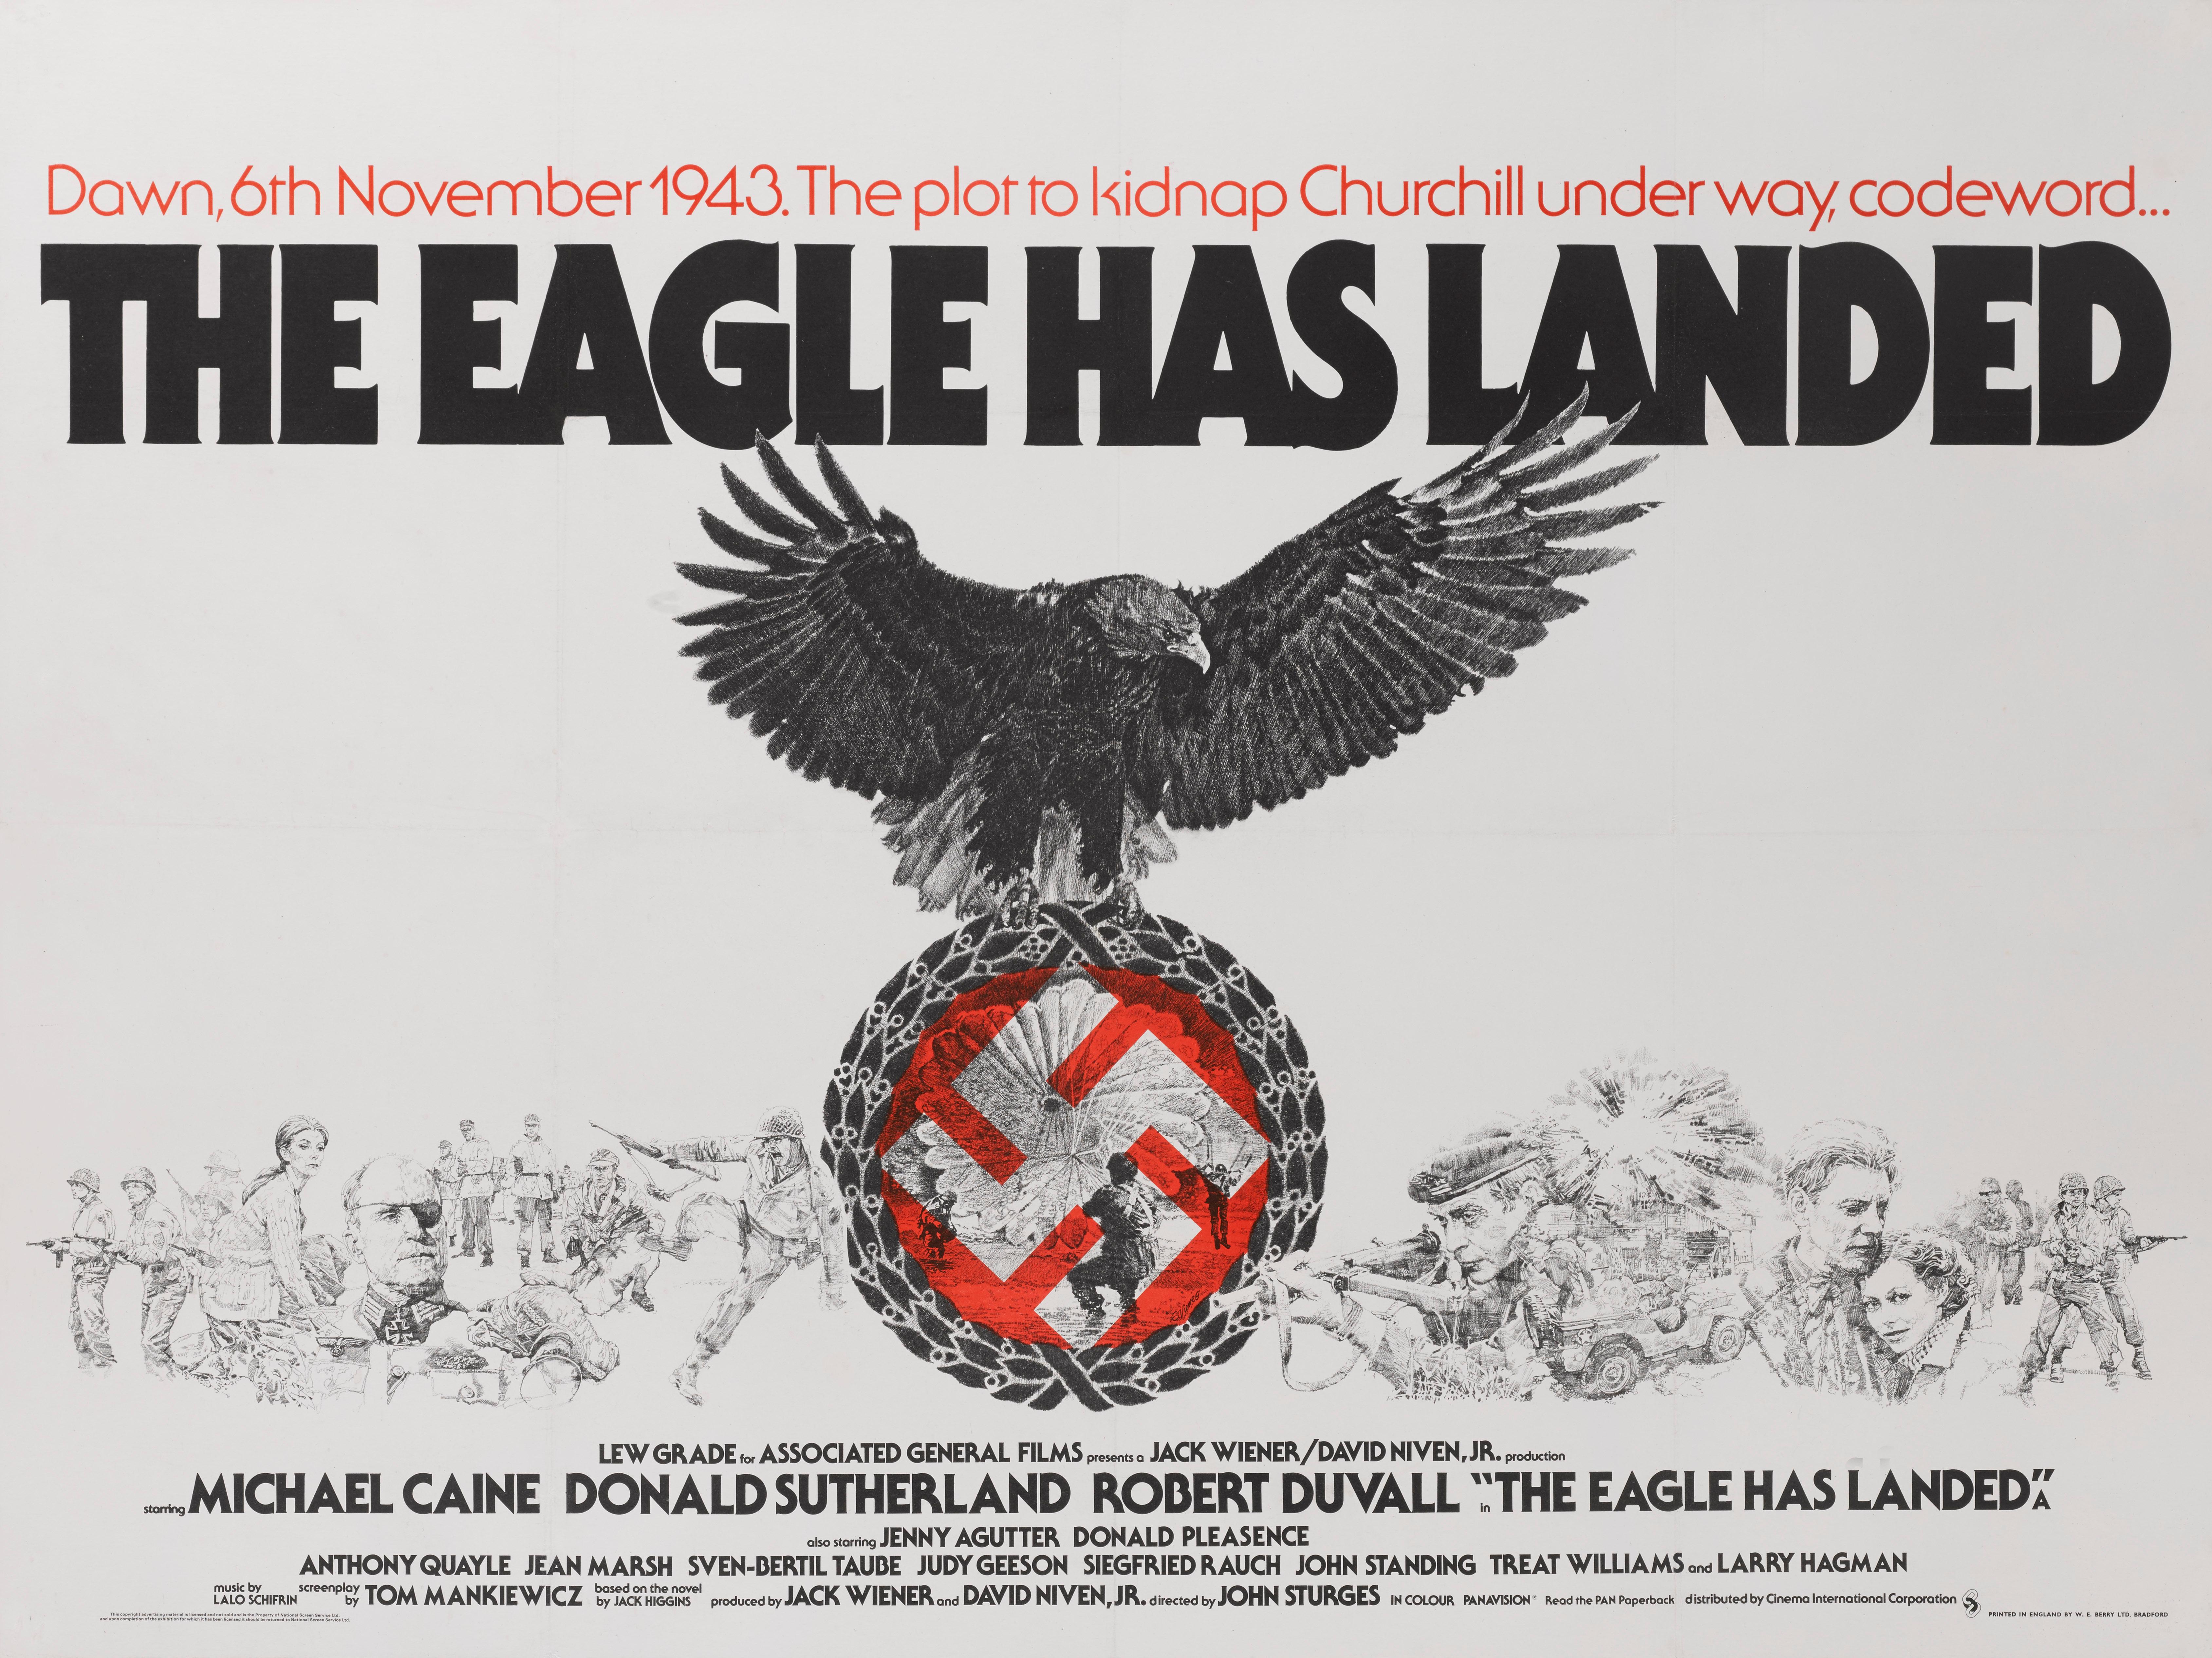 Original British film poster for the the World War II film The Eagle Has Landed 1976.
The film was directed John Sturges and Michael Caine, Donald Sutherland, Robert Duvall, Donald Pleasence. This poster is conservation line backed and would be